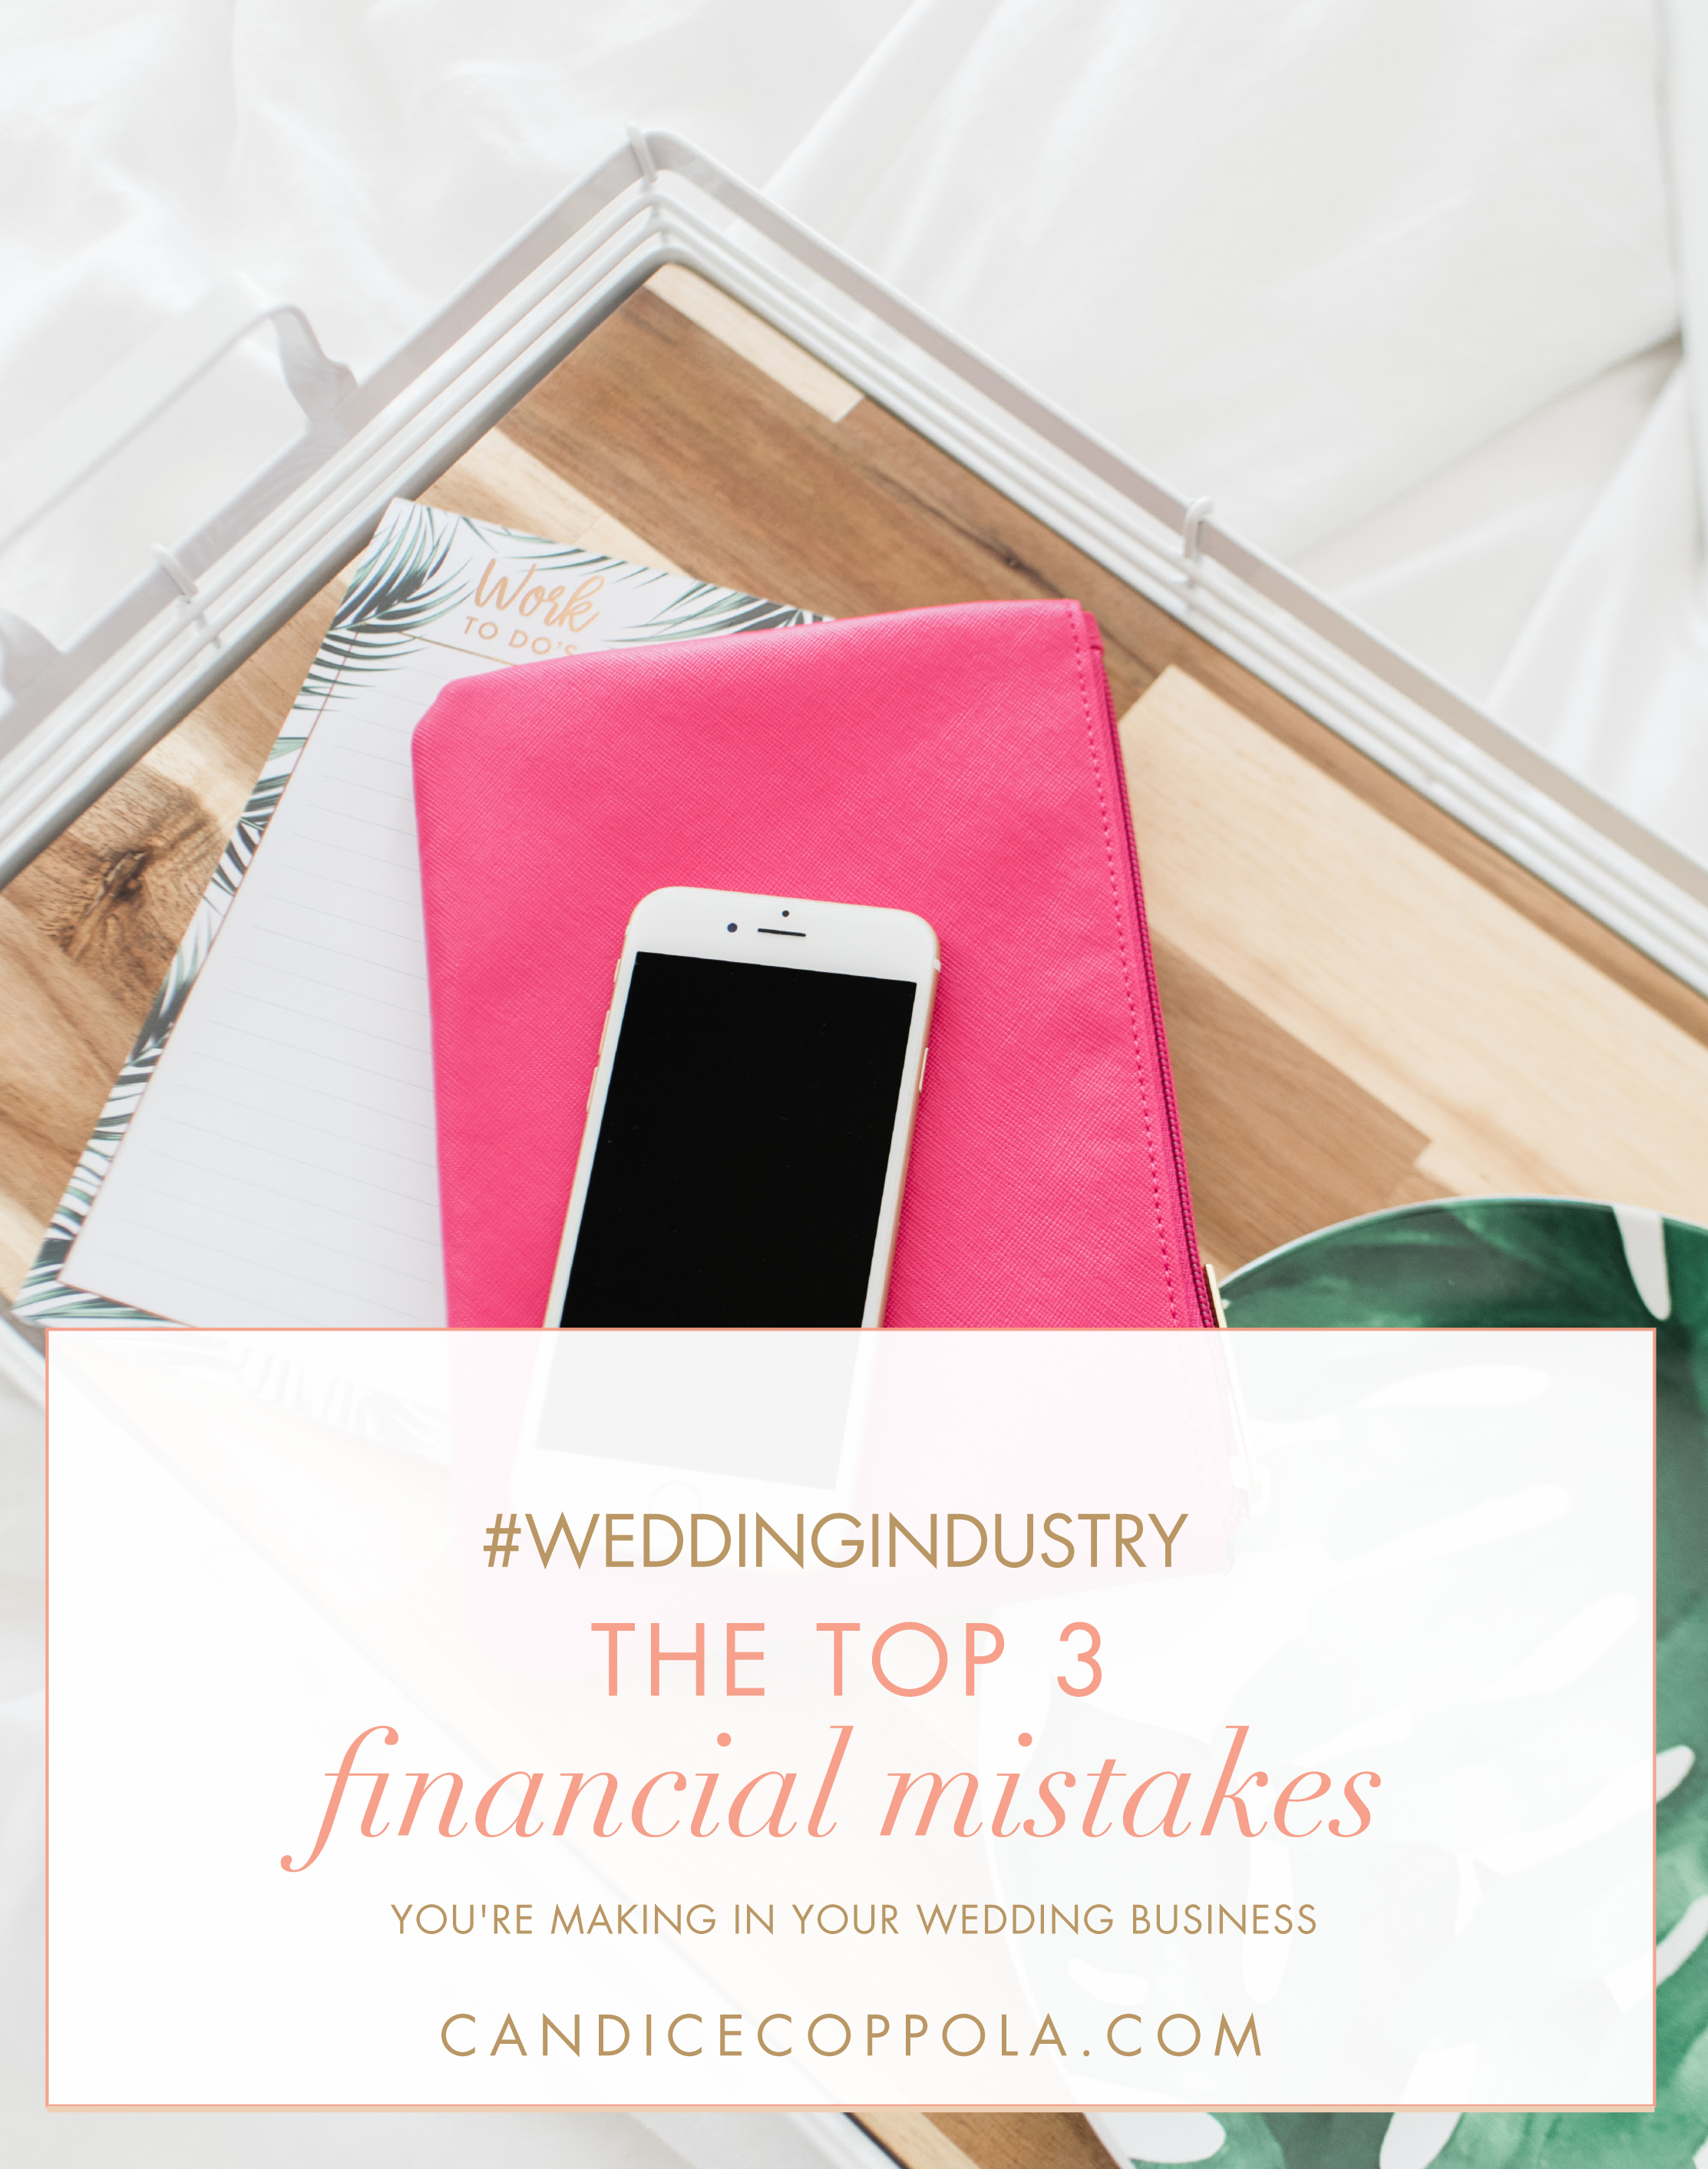 Michelle Loretta from Sage Wedding Pro's shares the top 3 financial mistakes you're making in your wedding business... via candicecoppola.com